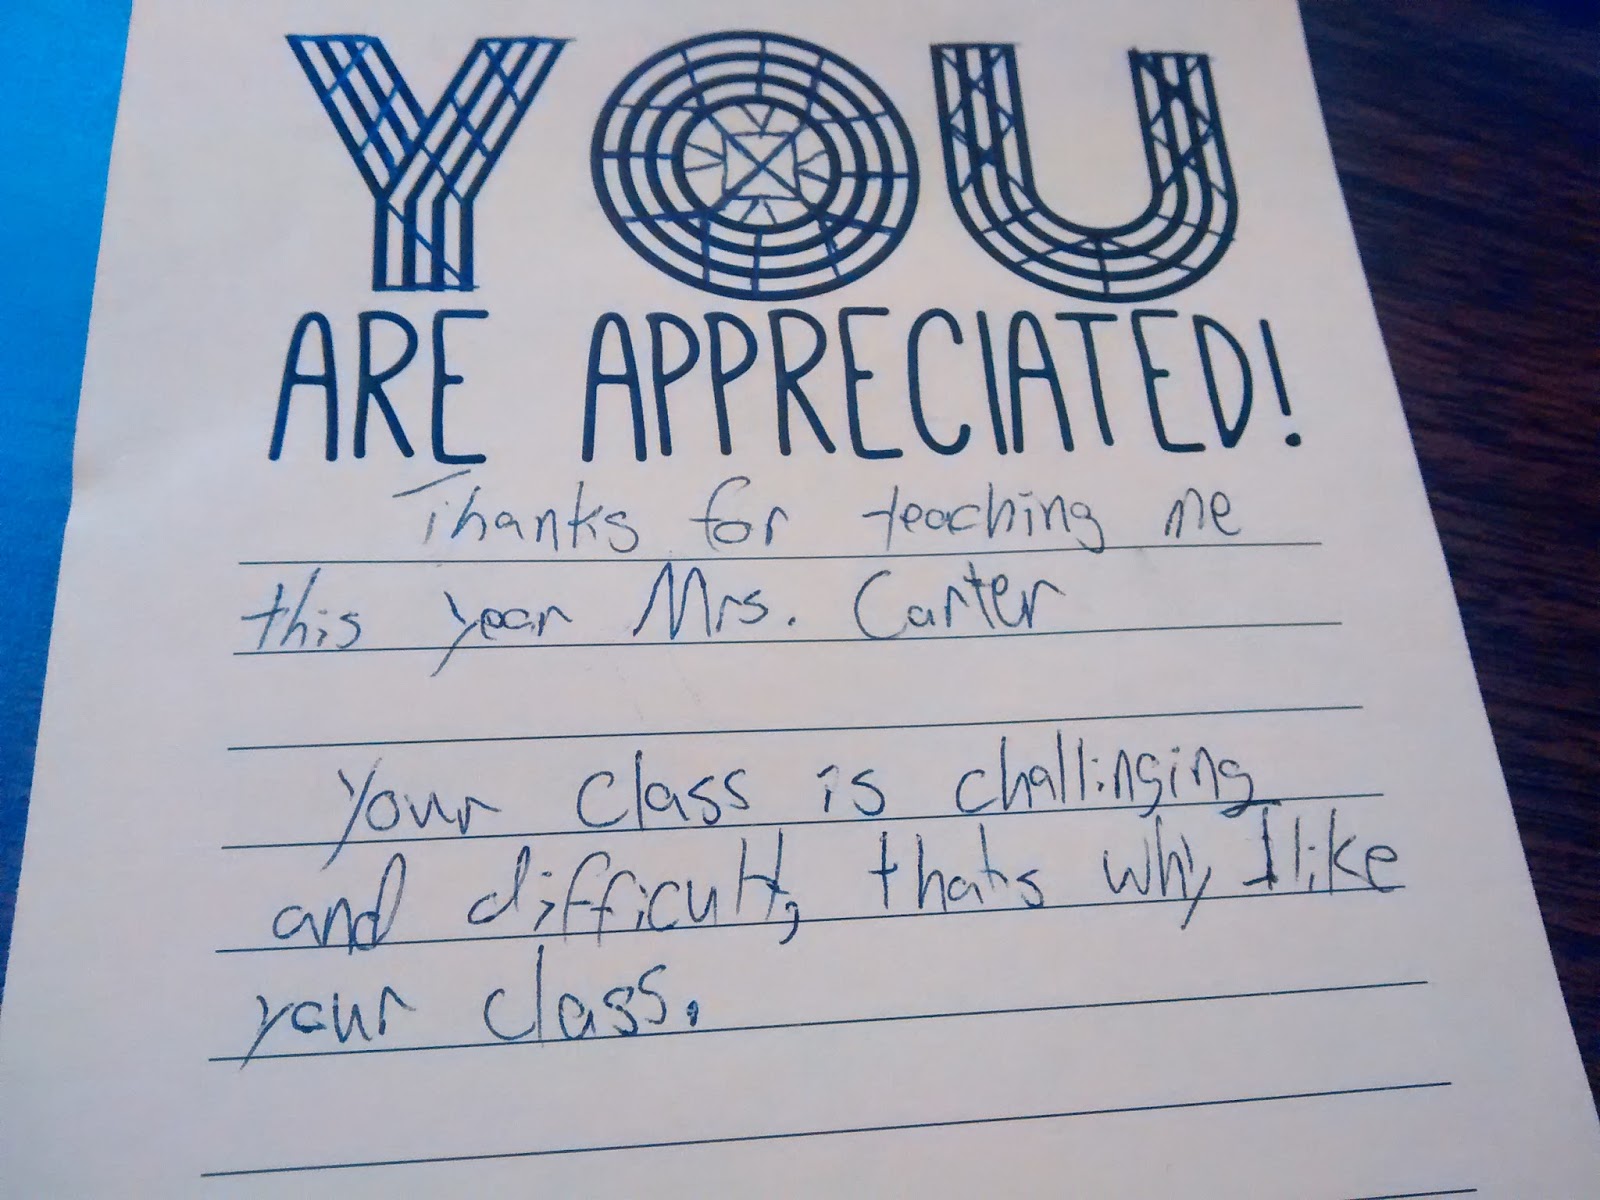 you are appreciated - free printable thank you notes for teacher appreciation week